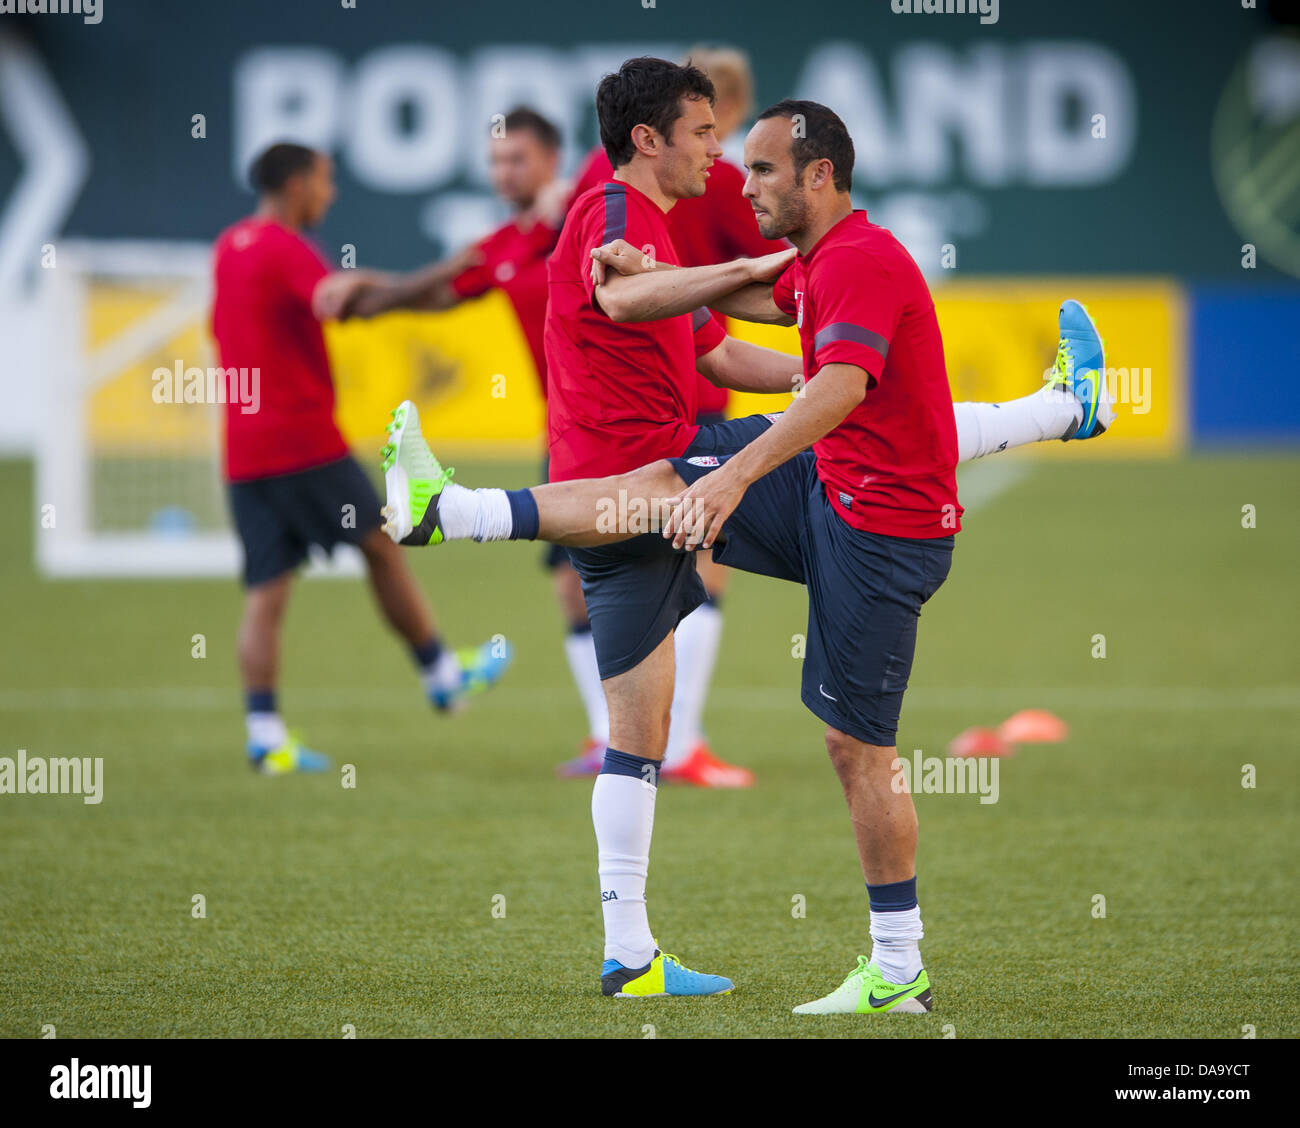 Portland, Oregon, USA. 8th July, 2013. U.S. all-time leading goal scorer LANDON DONOVAN (front) works out with a teammate as his U.S. national team team faces Belize in July 9, 2013 Gold Cup tournament play. Held every two years, the CONCACAF Gold Cup is the main association football competition of the men's national football teams governed by CONCACAF, determining the regional champion of North America, Central America, and the Caribbean. This year the Gold Cup is hosted in the United States with venues across the country and the championship game to be held in Chicago, IL (Credit Image: © Stock Photo